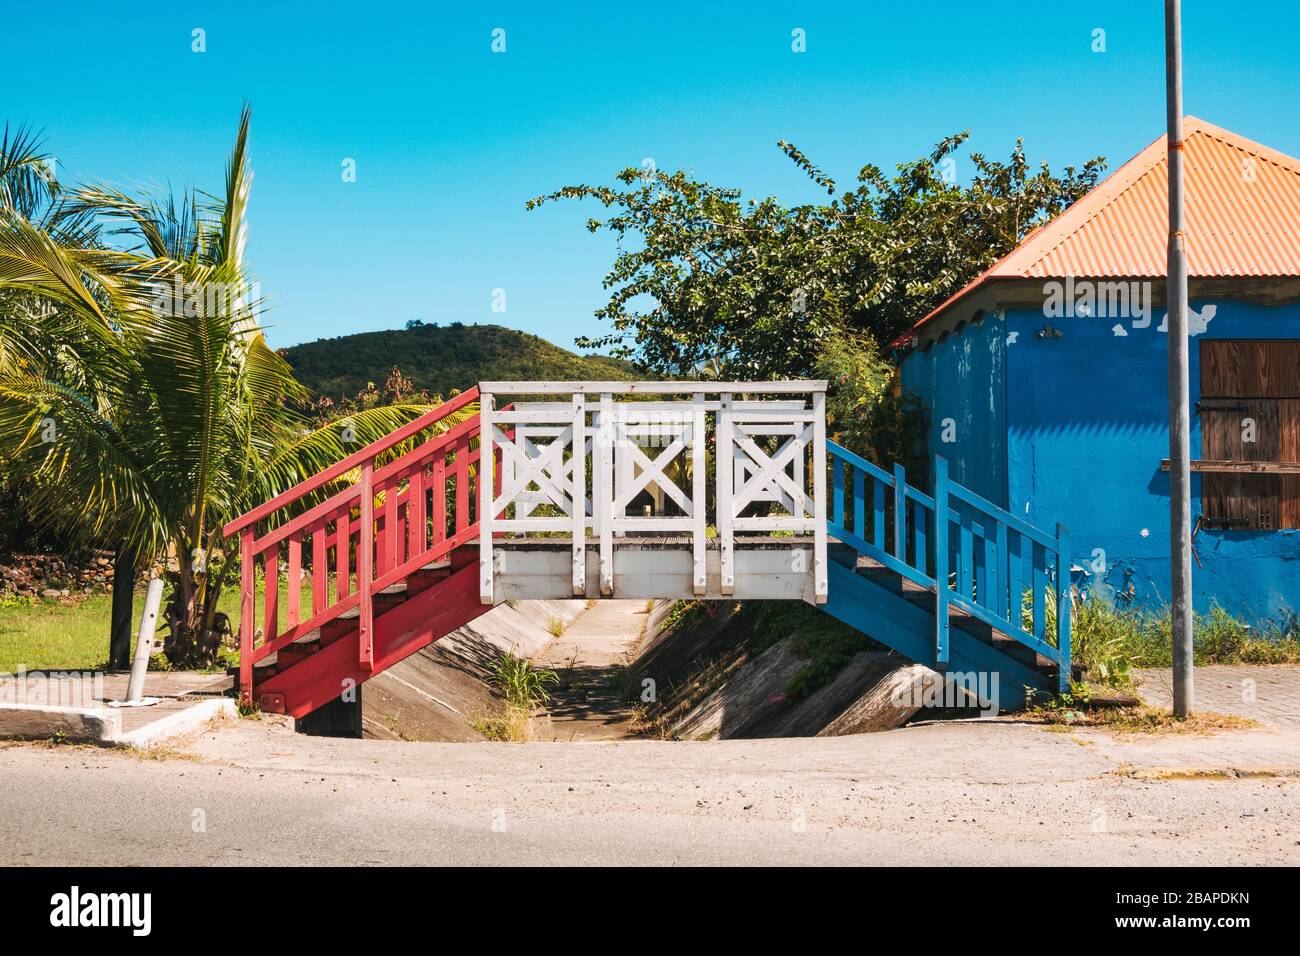 A bridge at the Monument to Unity and Friendship at the border between the French and Dutch sides of the Caribbean island of St. Martin / St. Maarten Stock Photo